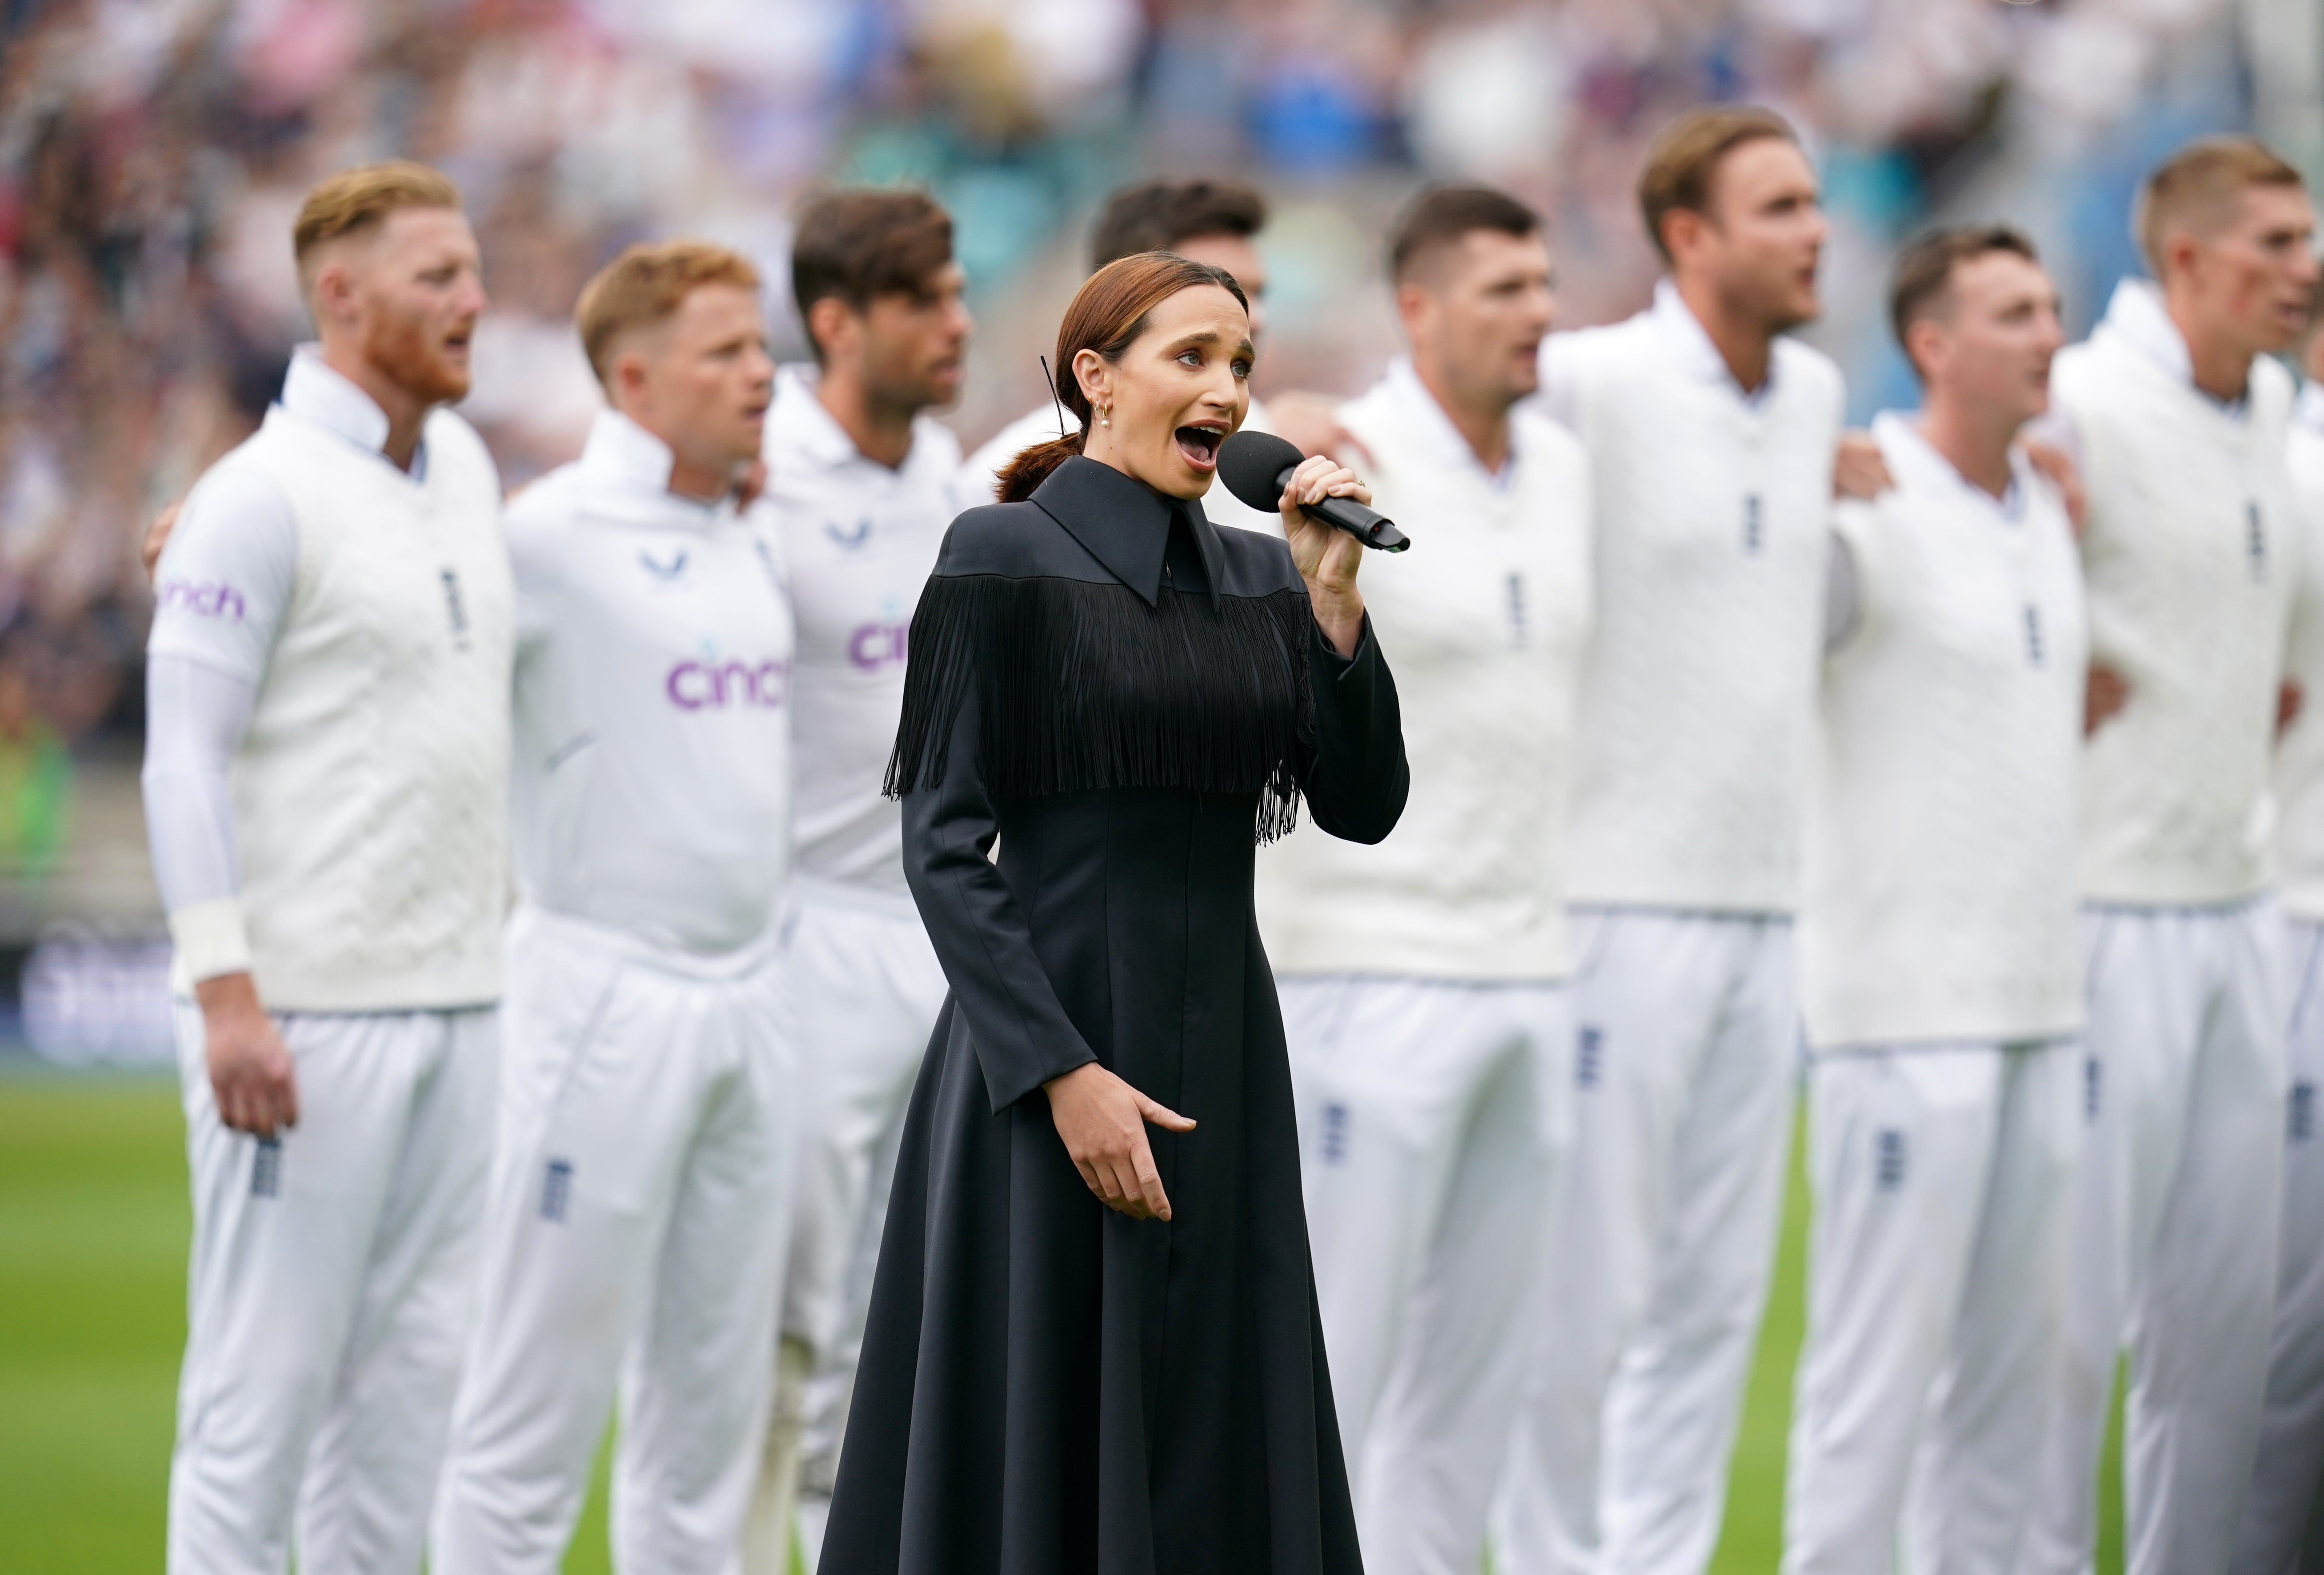 Laura Wright sings God Save The King ahead of day three of England’s third Test against South Africa at the Kia Oval (John Walton/PA)